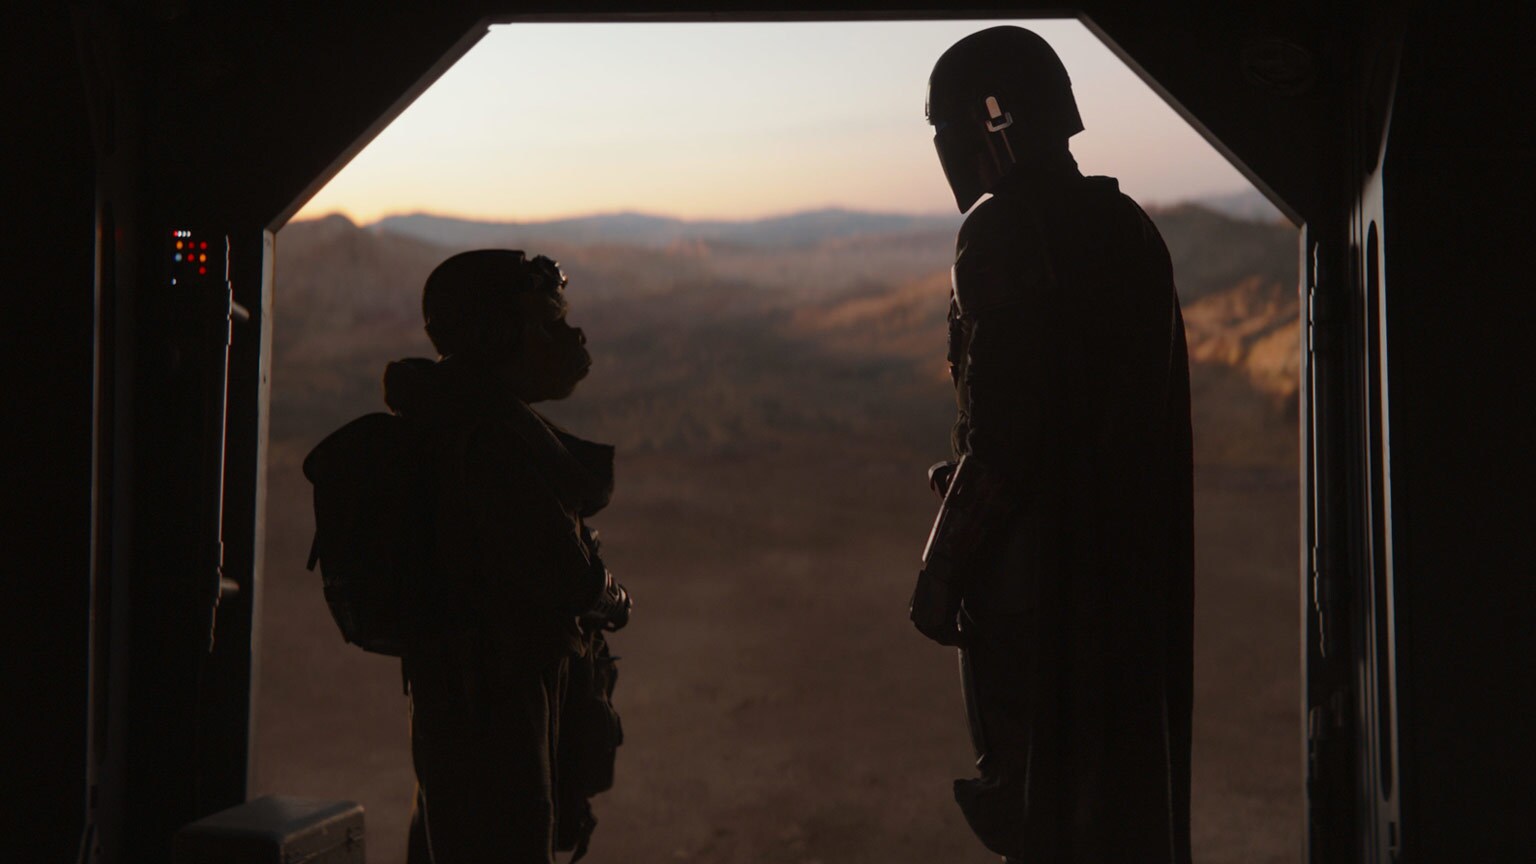 Bounty Hunting Highlights: 6 of Our Favorite Moments from The Mandalorian – "Chapter 2: The Child"